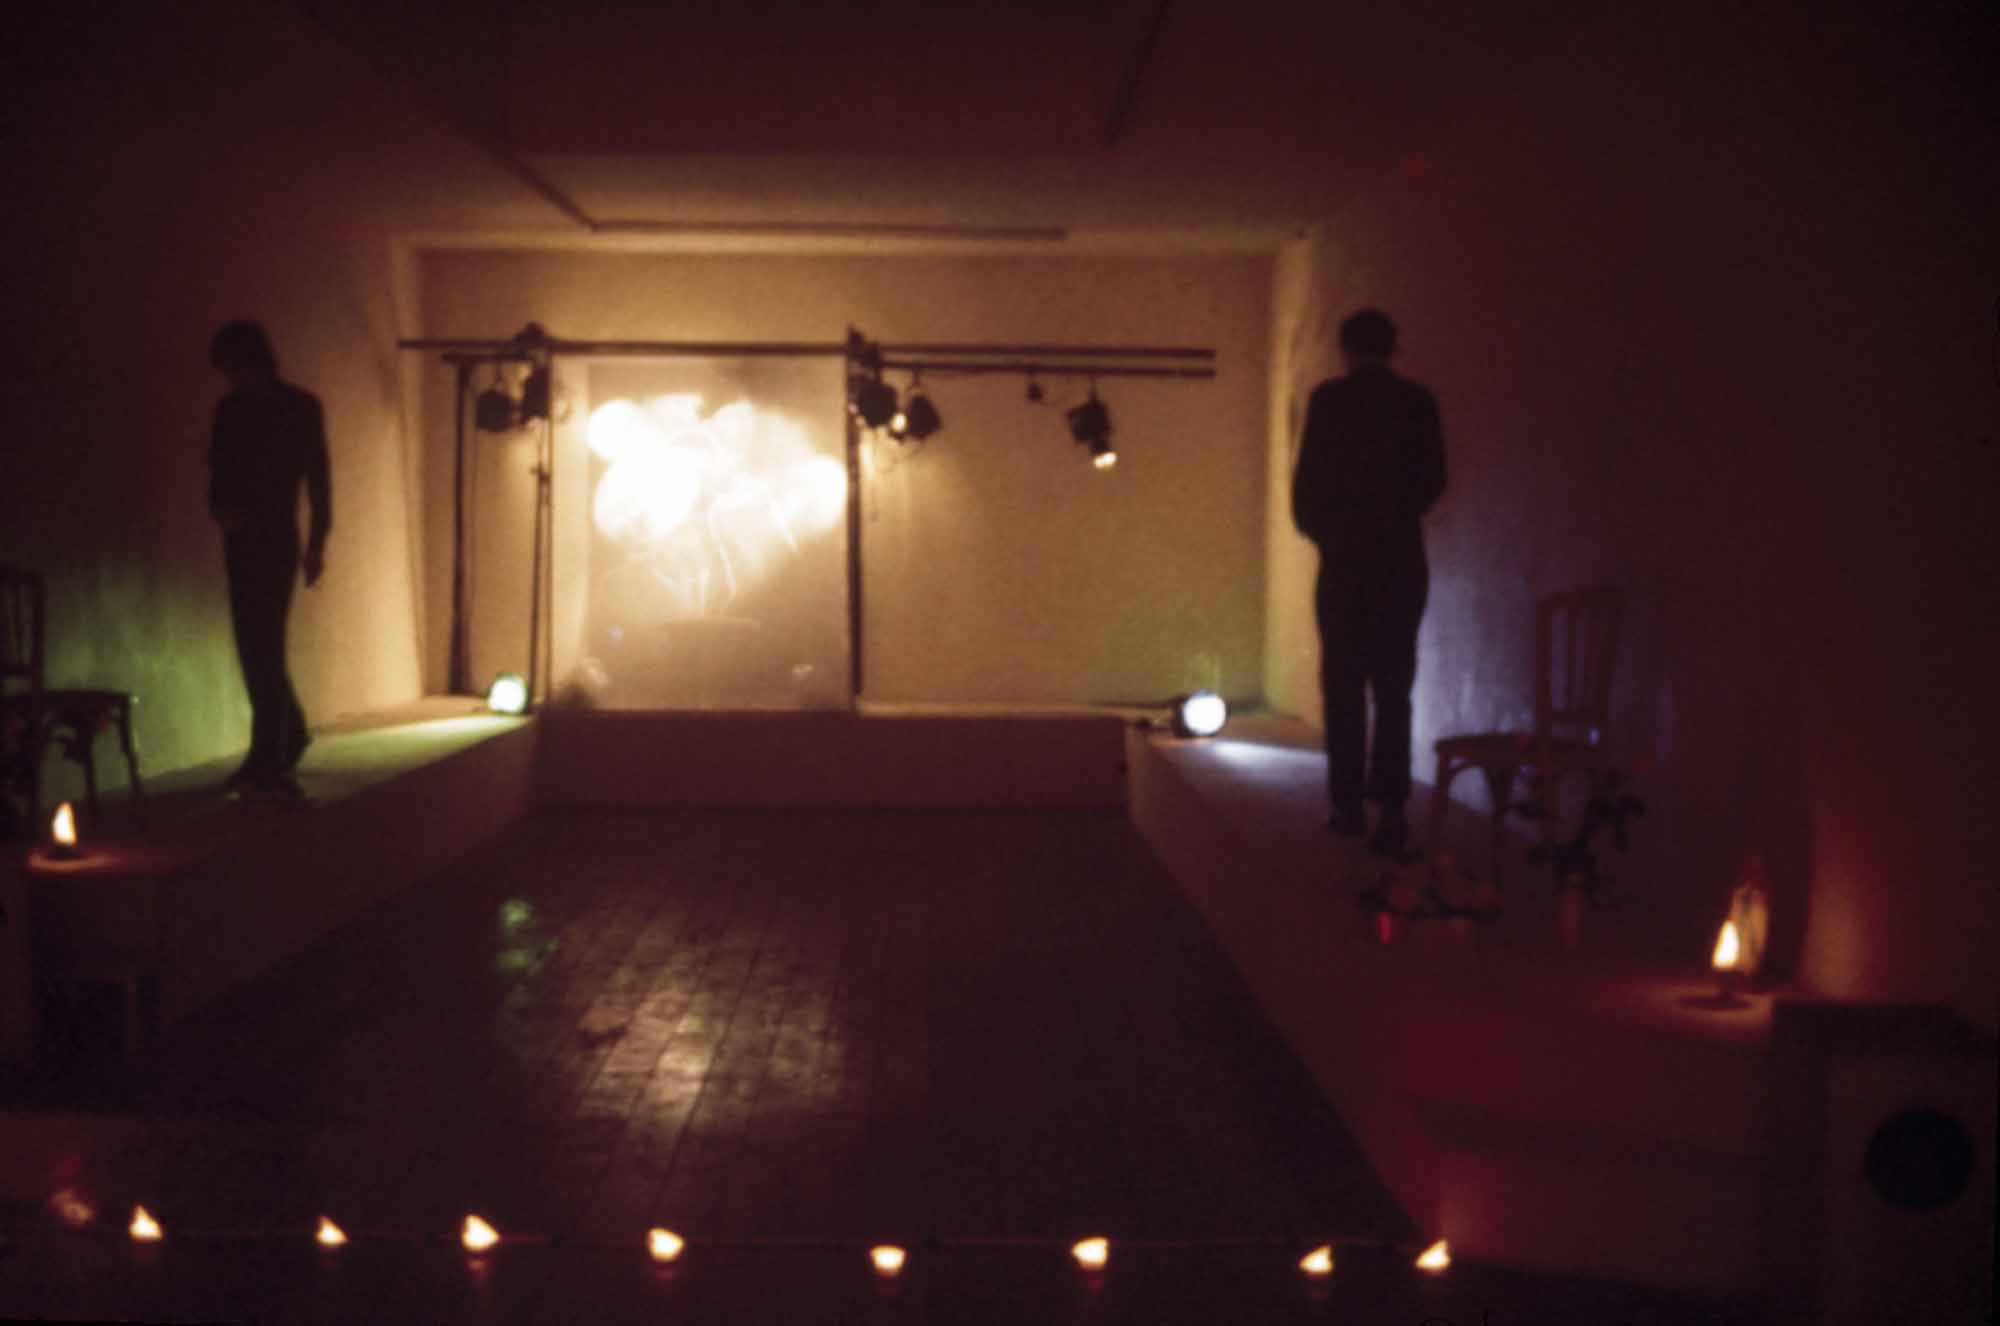 Marc Camille Chaimowicz, Fade at The Acme Gallery, London, 18 and 19 November (1976). Courtesy of Acme, Acme Archive.